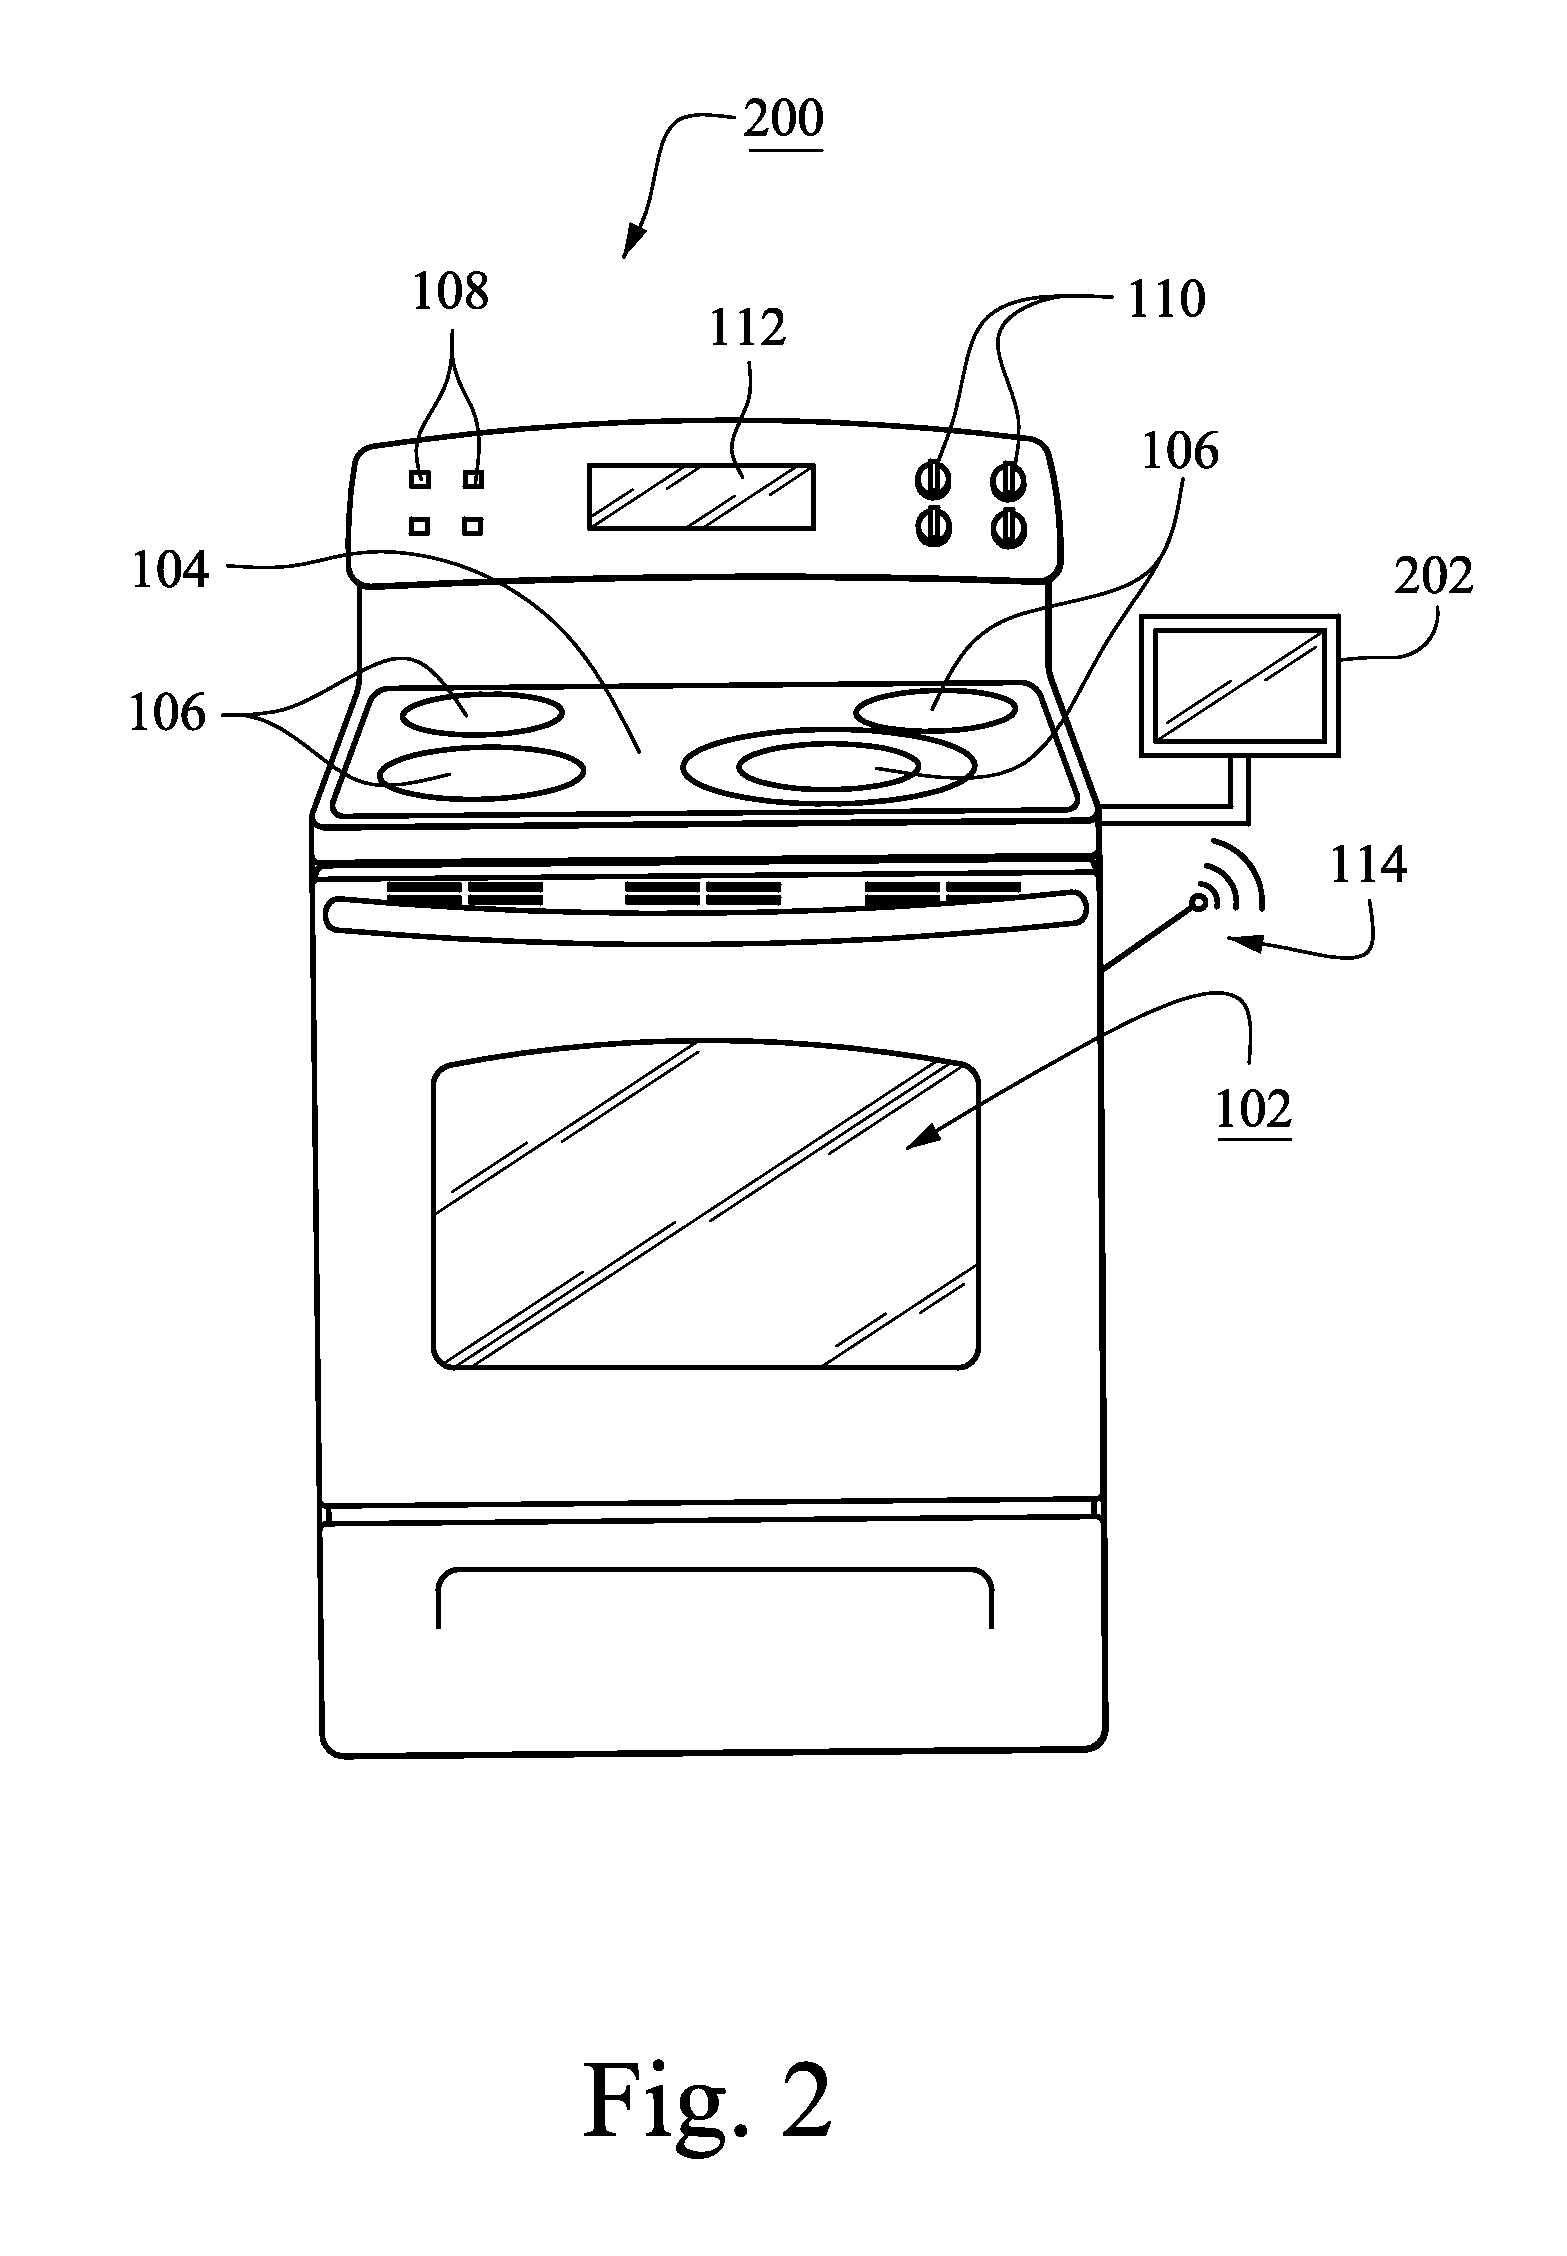 Intelligent home cooking appliance, associated systems, and/or methods